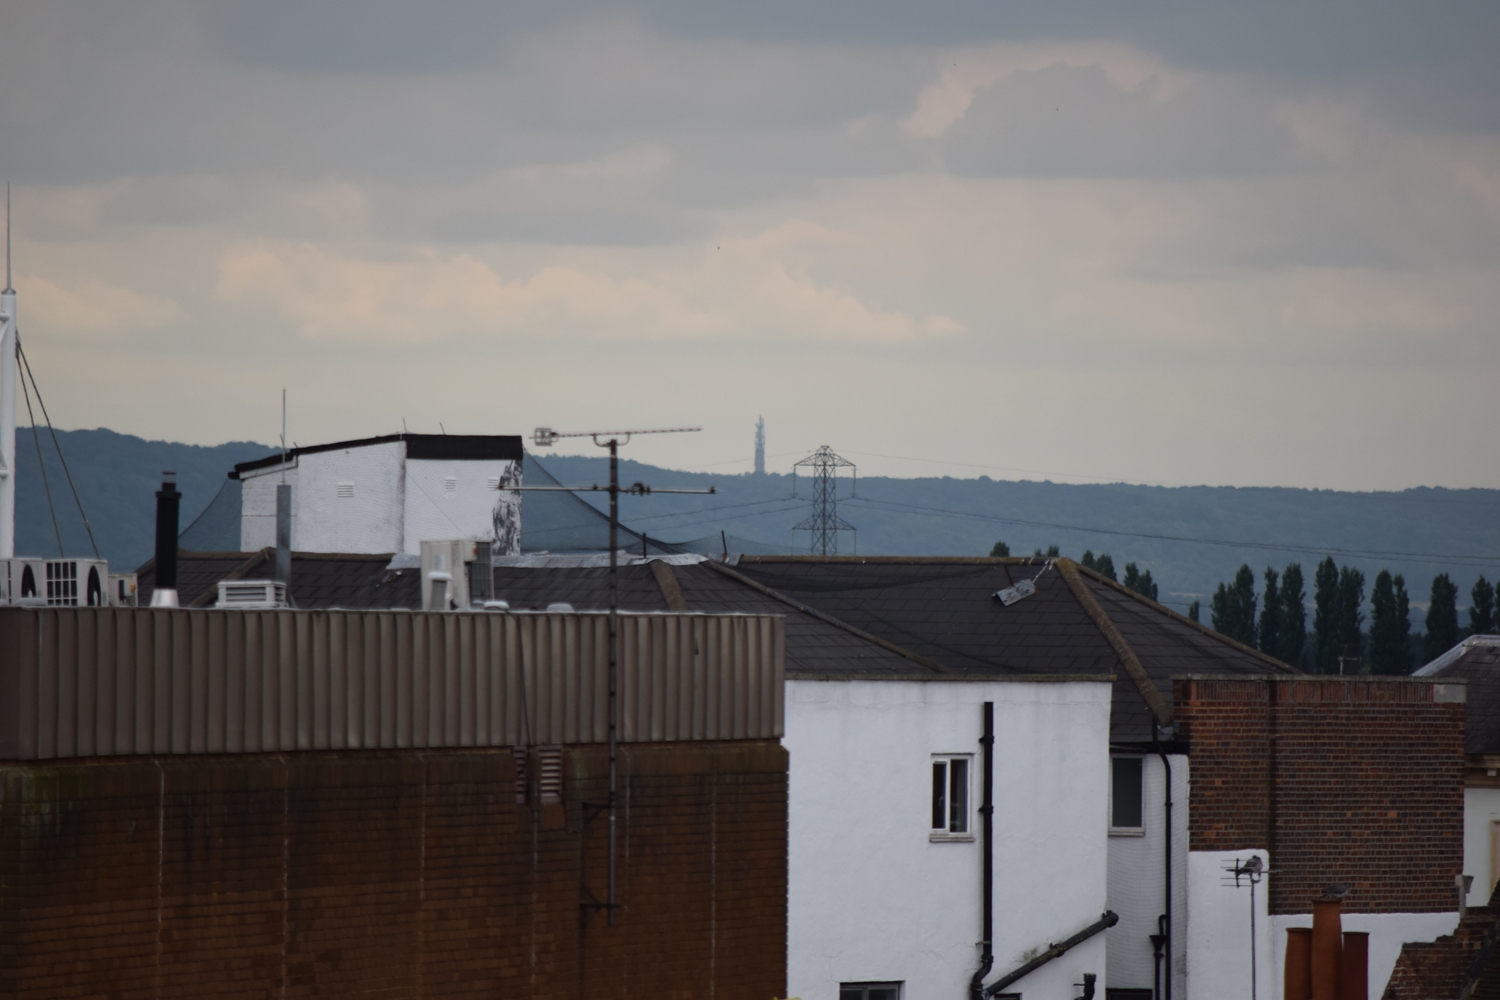 Nikkor 55-300mm Stokenchurch BT Tower from Aylesbury Telephone Exchange, 300mm